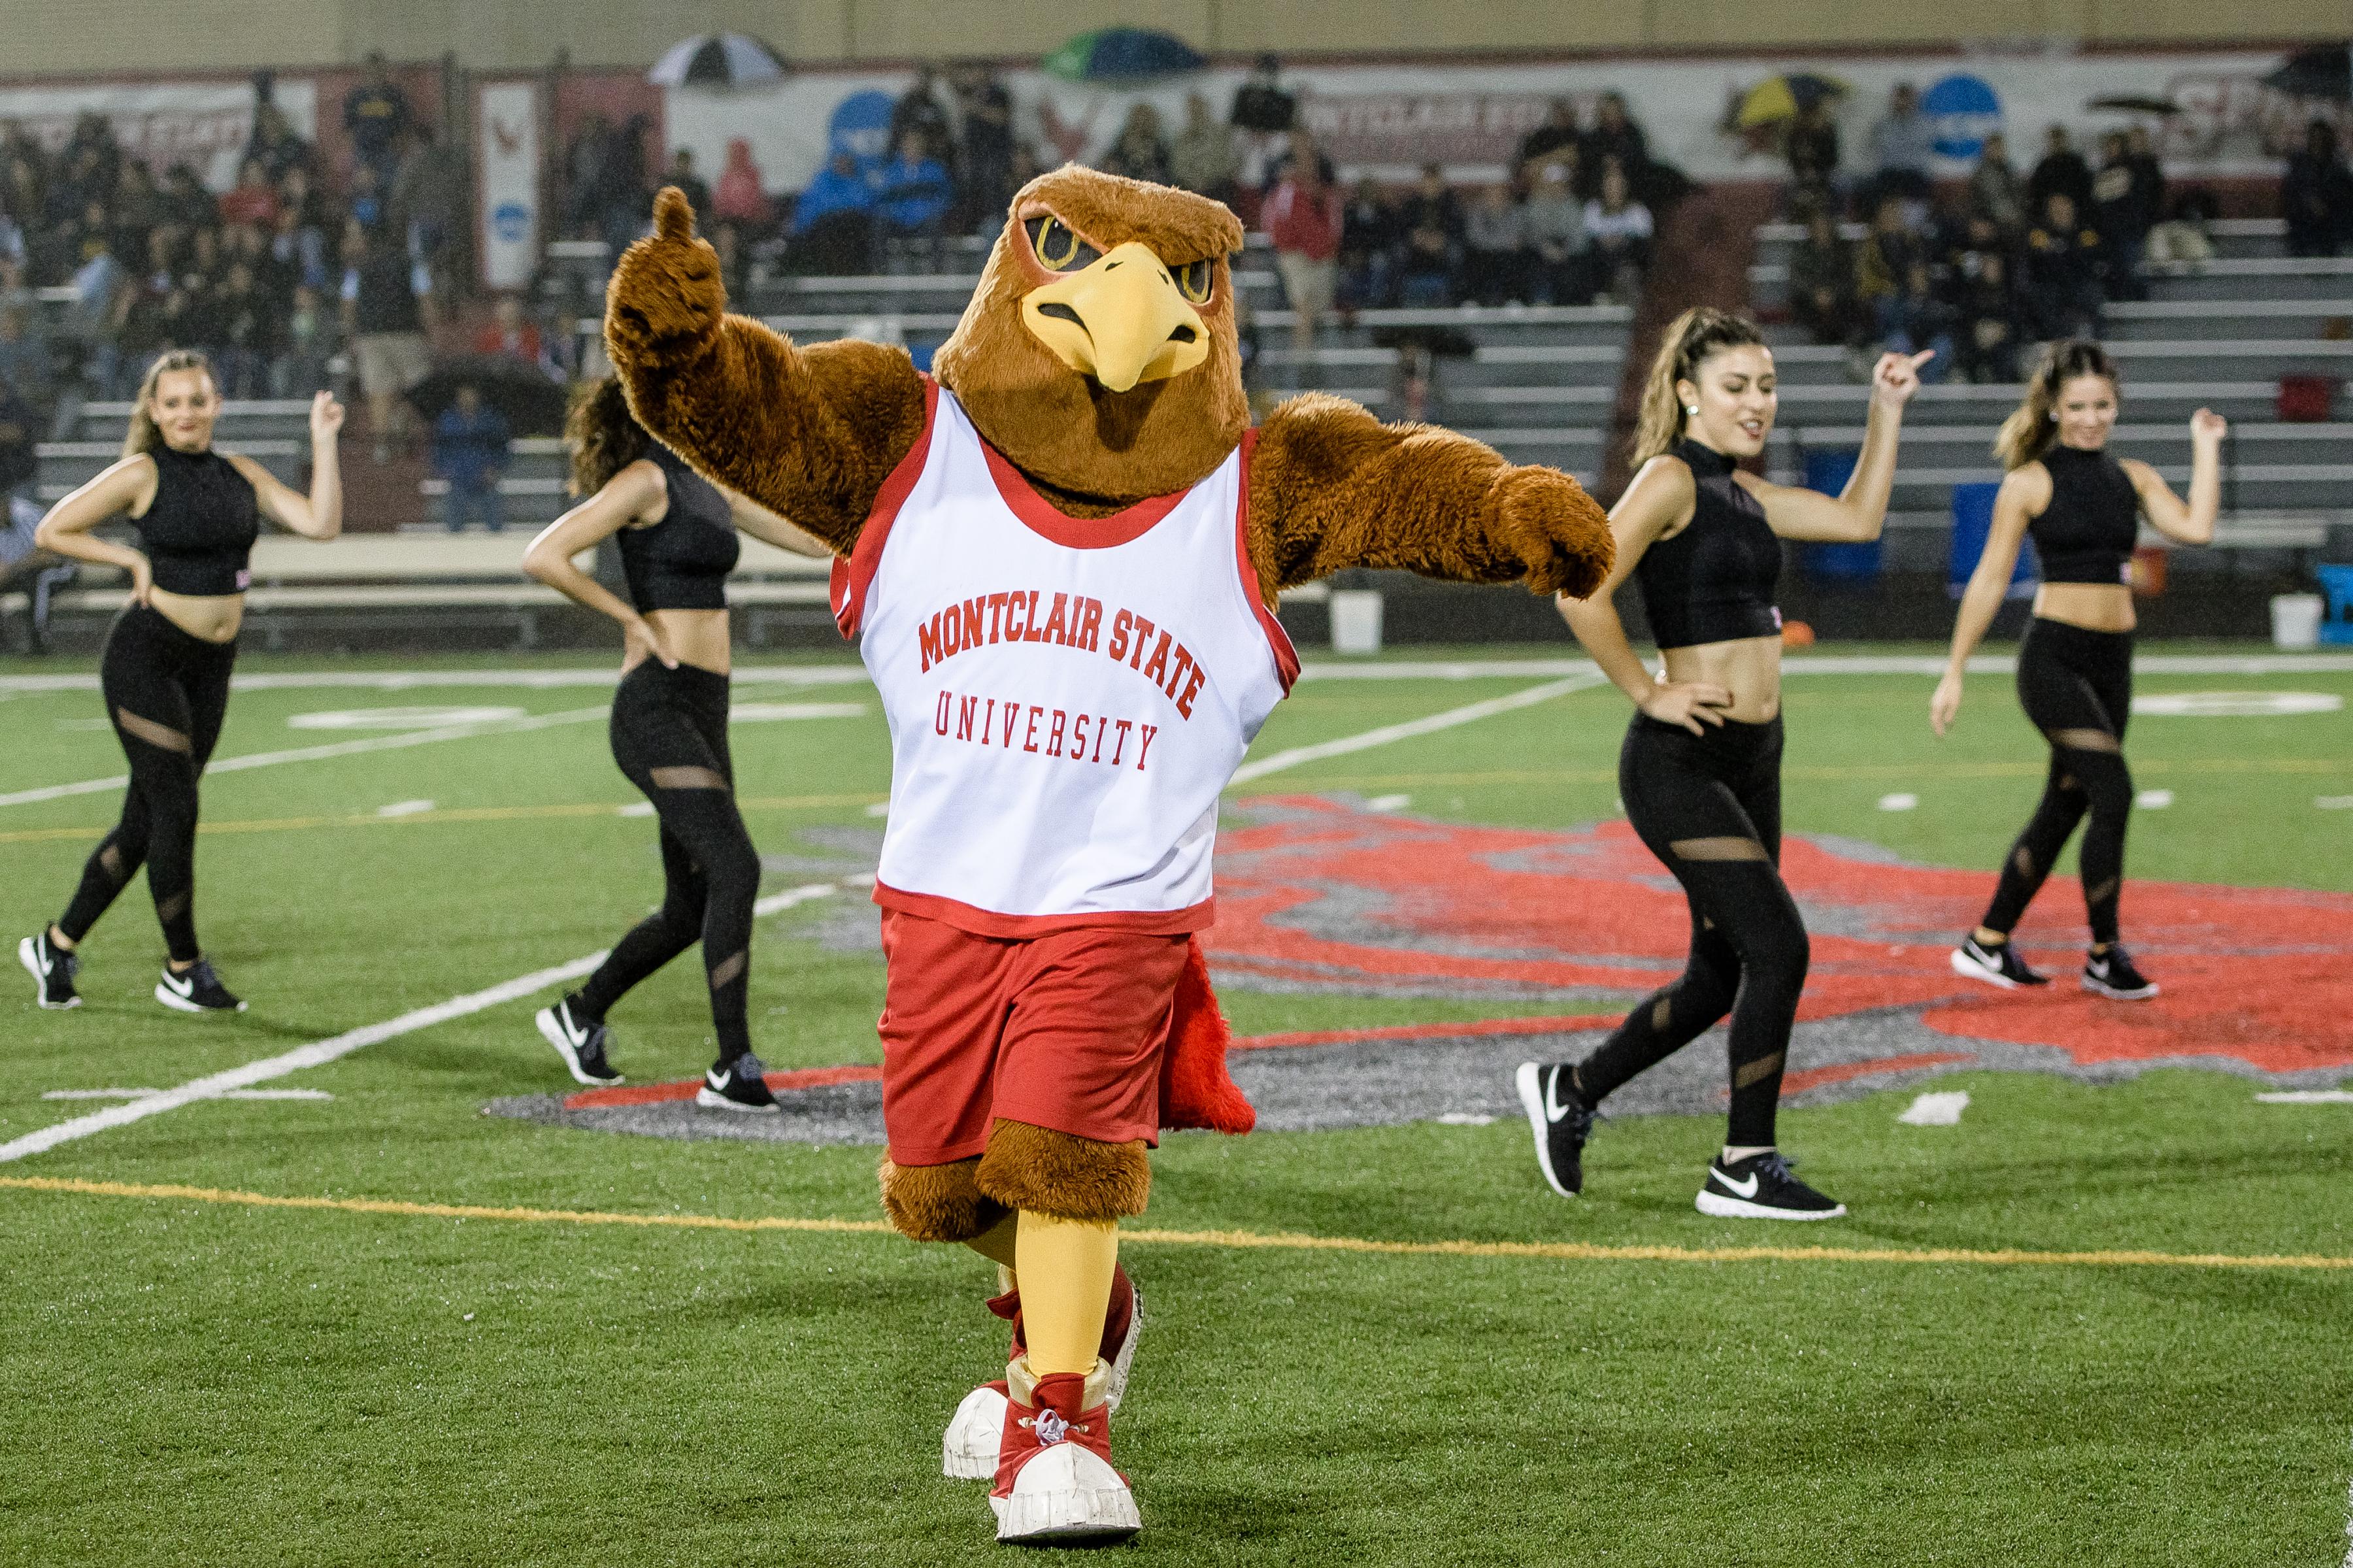 What Is Homecoming? – Homecoming - Montclair State University